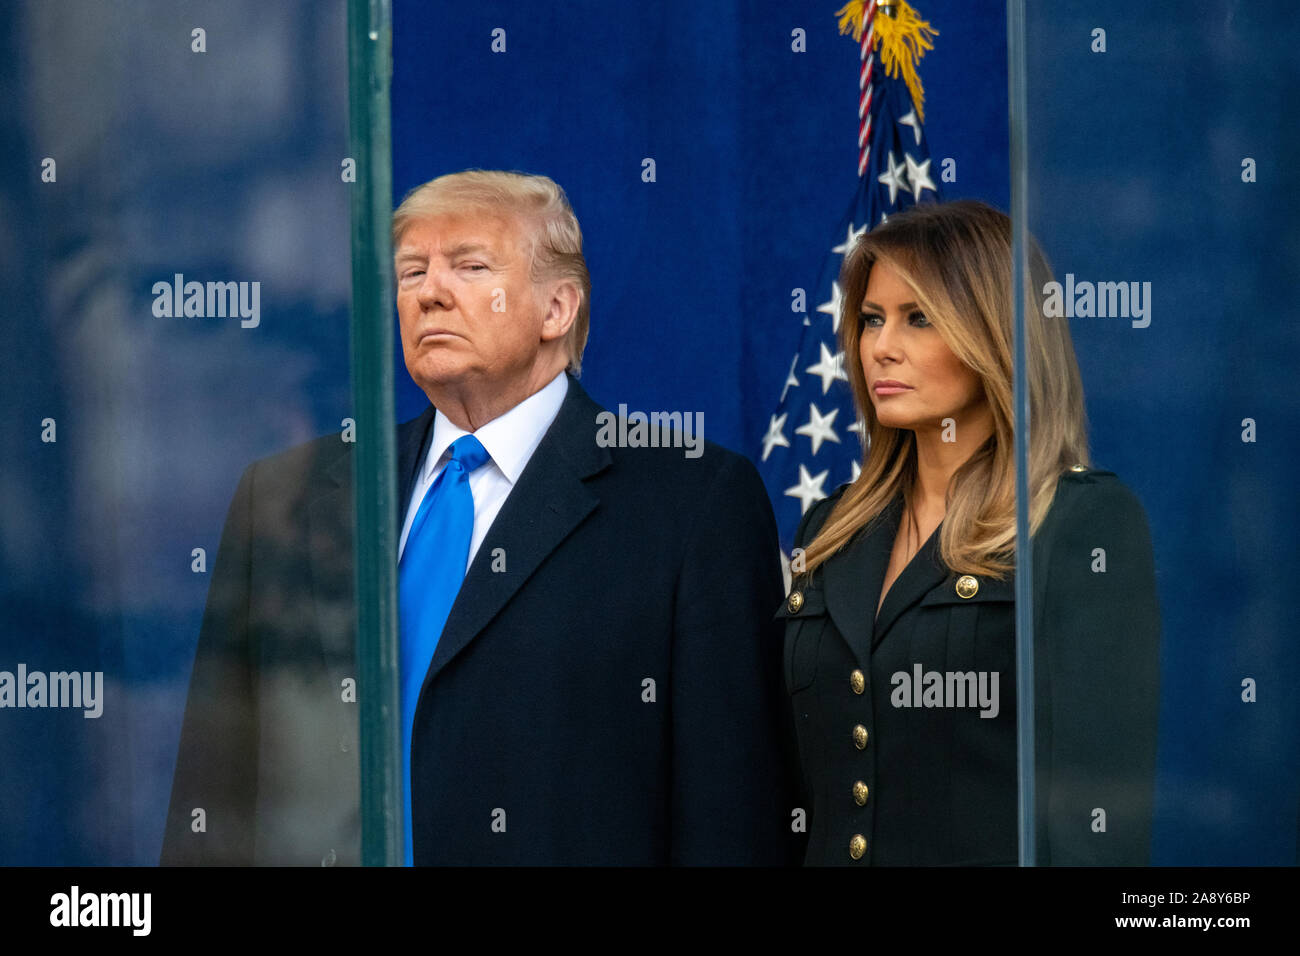 New York, USA,   11 November 2019. US President Donald Trump and First Lady Melania Trump stand behind bullet-proof glass before the start of the Veterans Day Parade in New York City.  Credit: Enrique Shore/Alamy Live News Stock Photo